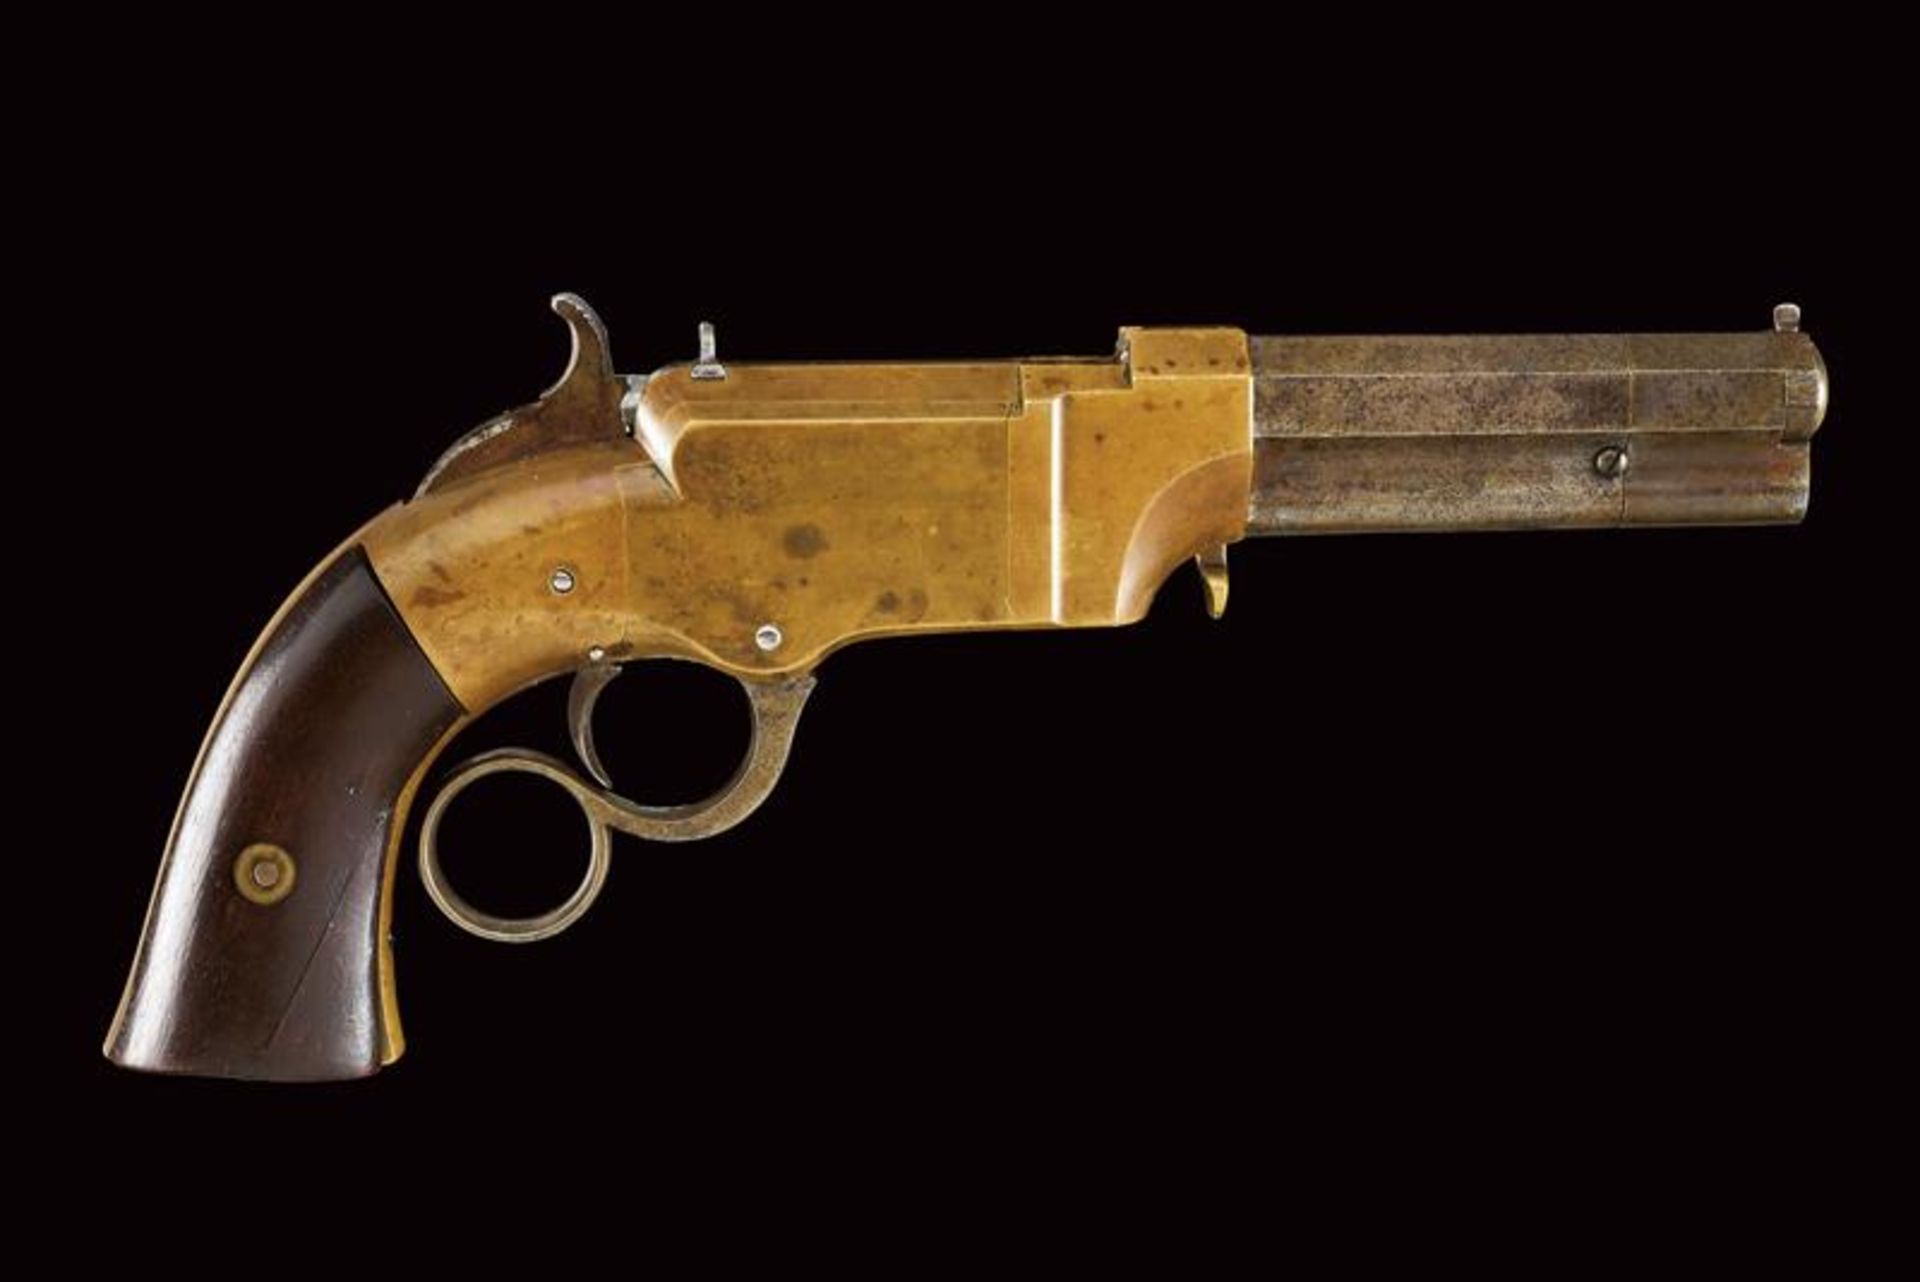 A Volcanic Lever Action No. 1 Pocket Pistol - Image 6 of 6